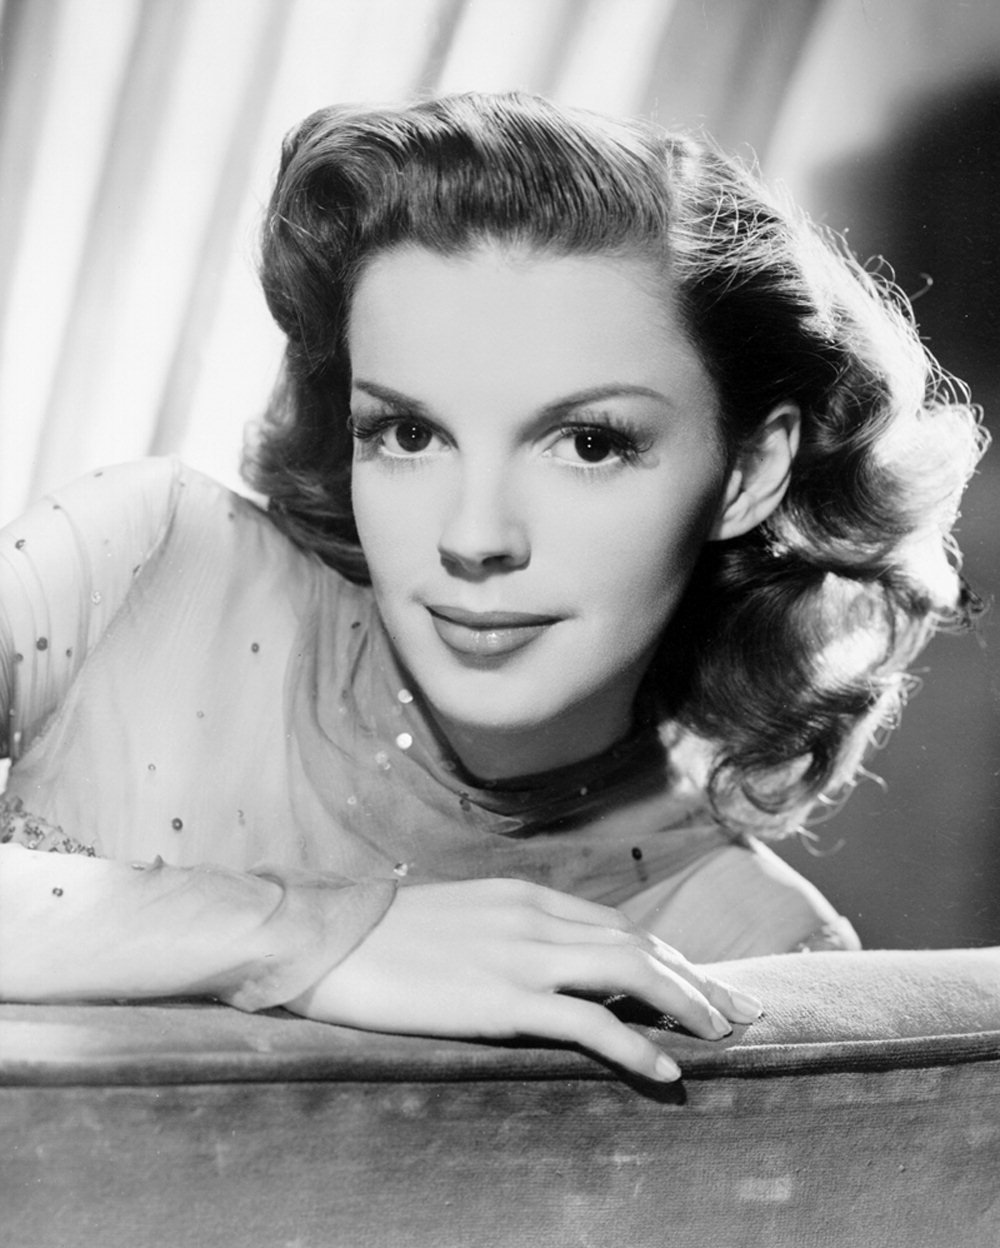 A publicity still of Judy Garland from MGM used for the promotion of The Harvey Girls | Source: Wikimedia Commons